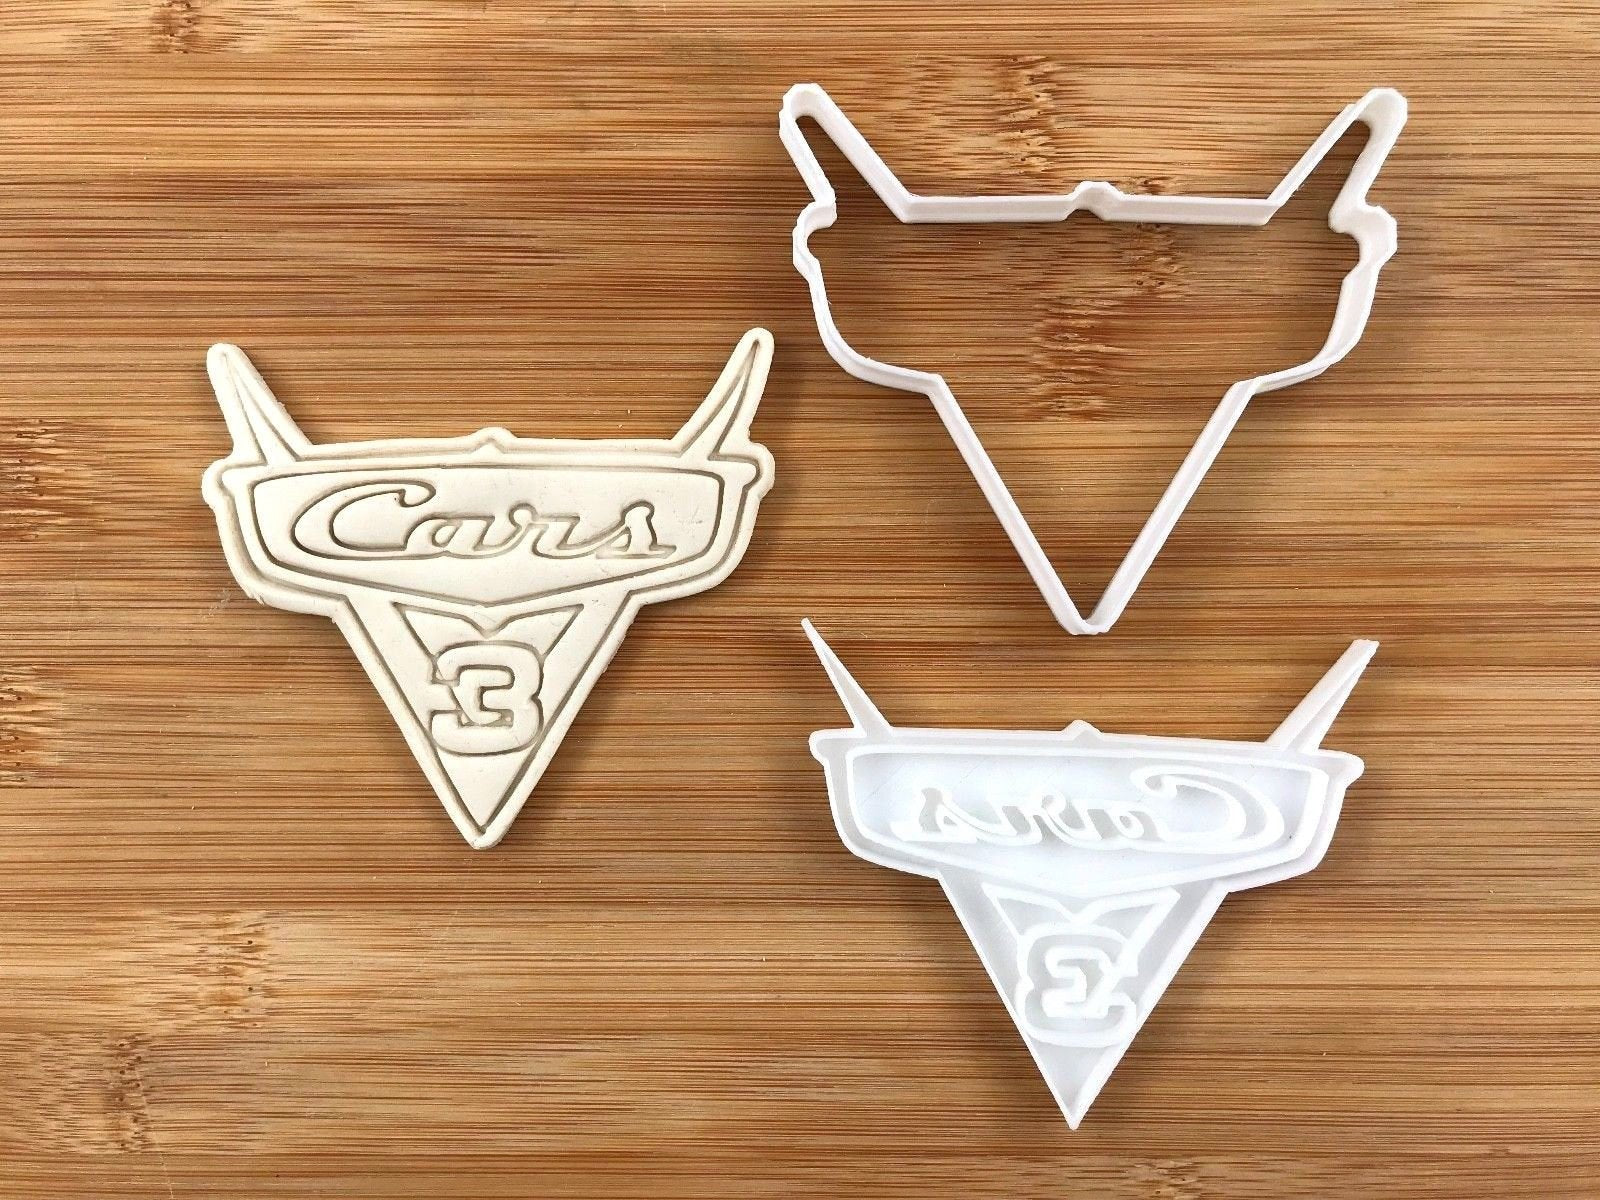 Cars-INSPIRED Logo 003 Cookie cutter + stamp MEG cookie cutters